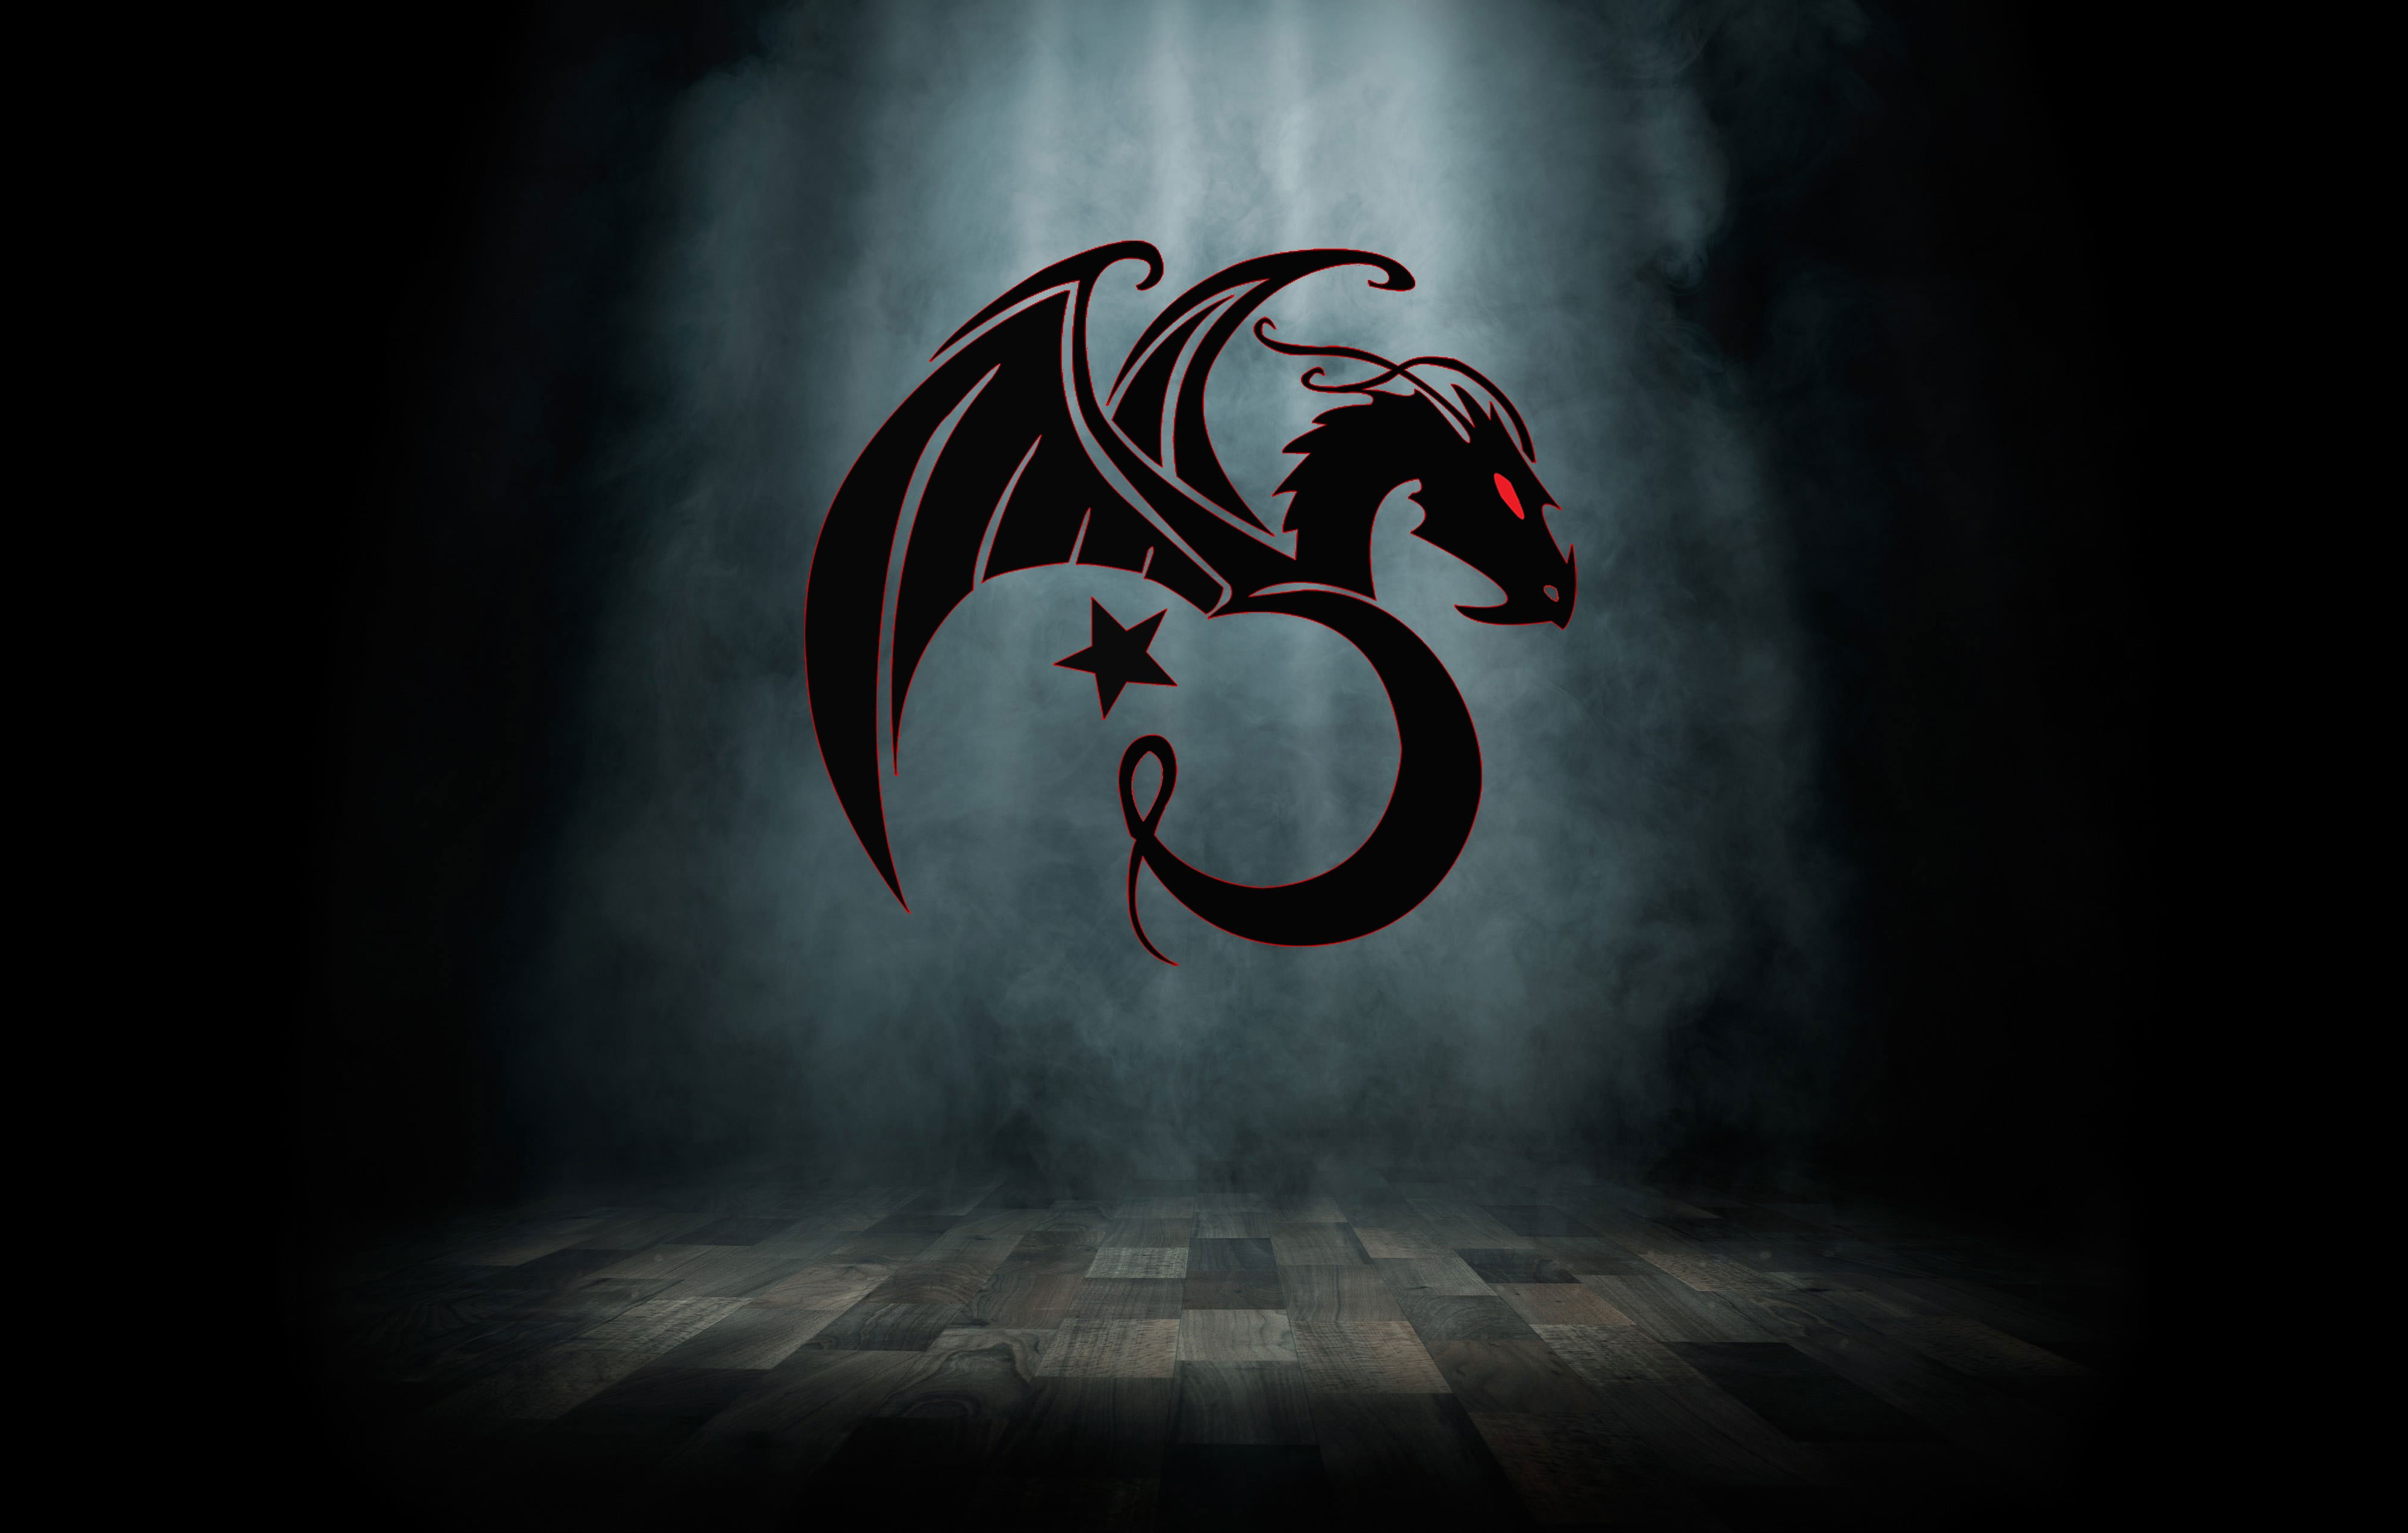 🔥 #black dragon wallpaper desktop - android HD Photos & Wallpapers (60+  Images) - Page: 3